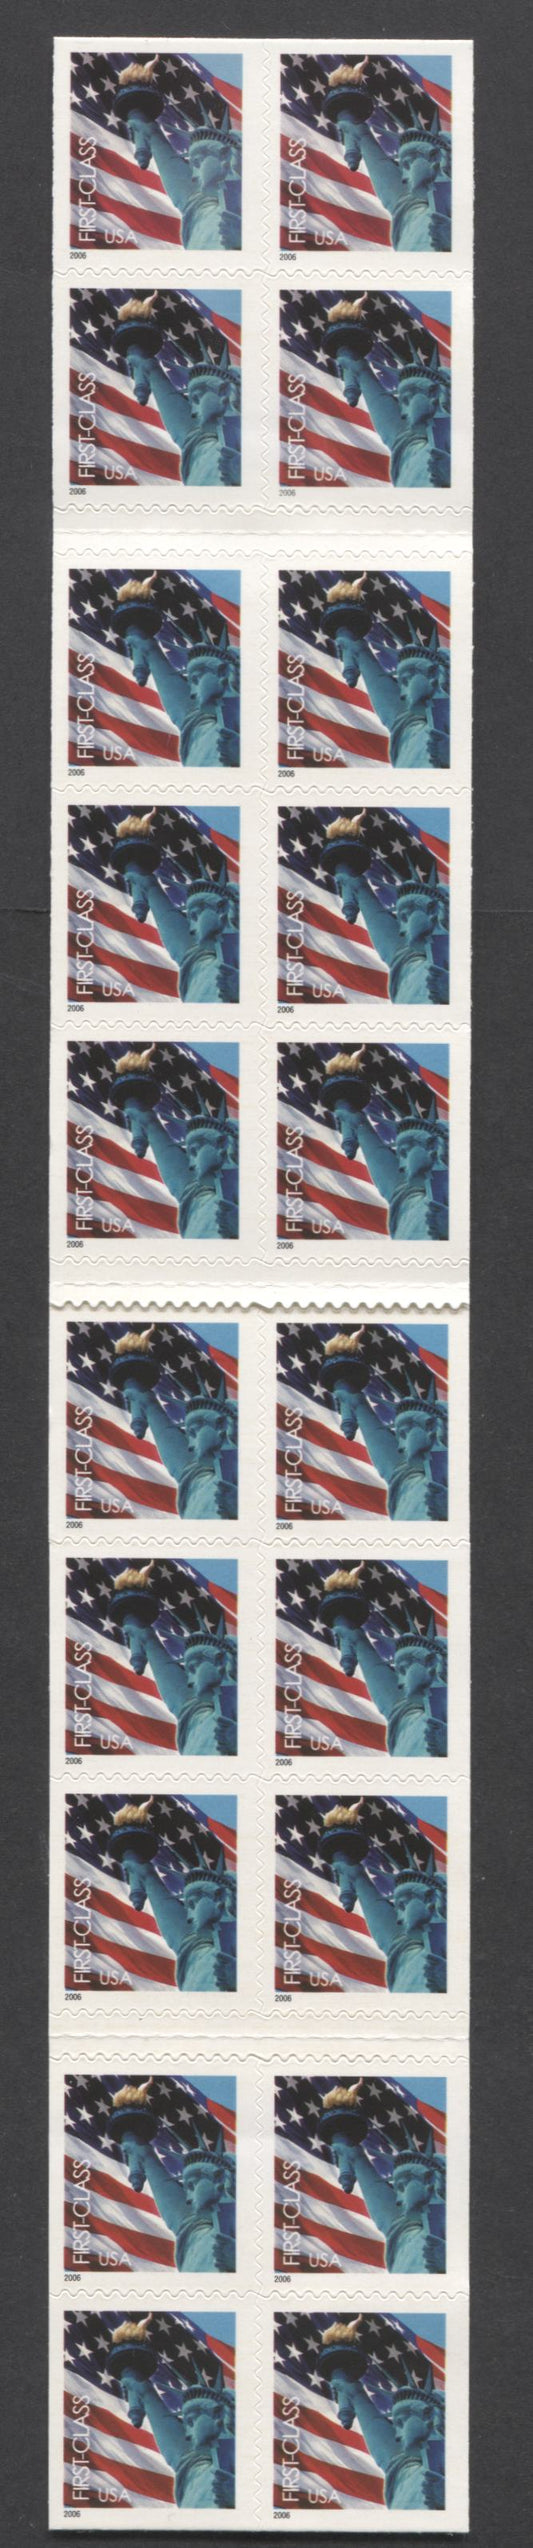 Lot 202 United States SC#3974a-b 37c Multicolored 2005 Flag & Statue Of Liberty Issue, A VFNH Booklet Of 20, Click on Listing to See ALL Pictures, 2017 Scott Cat. $16